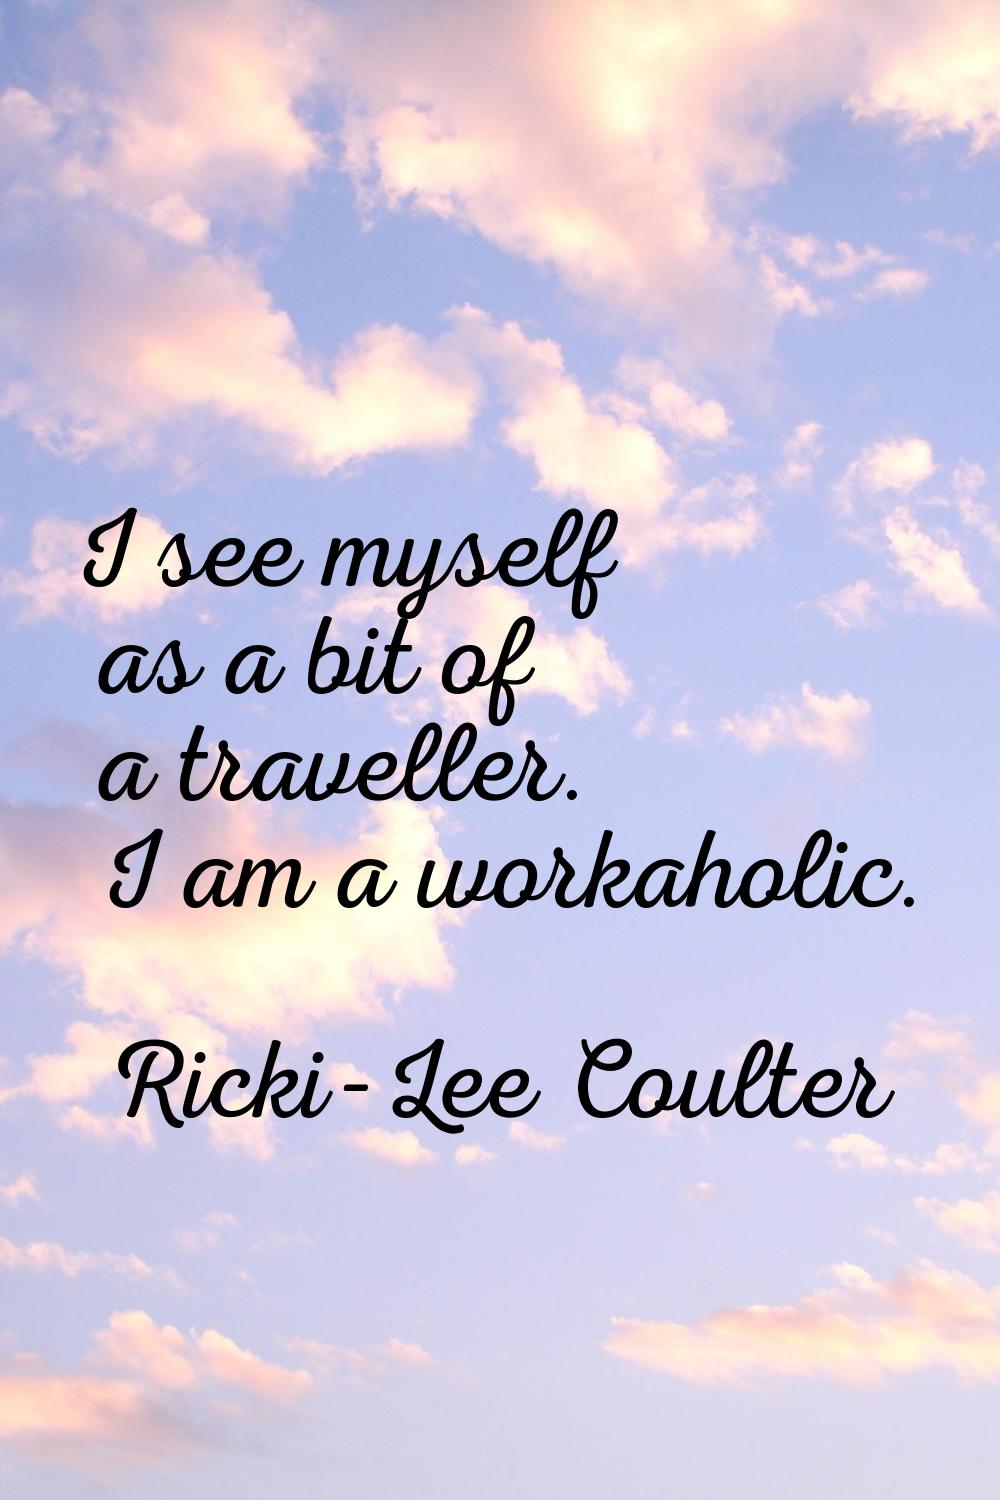 I see myself as a bit of a traveller. I am a workaholic.